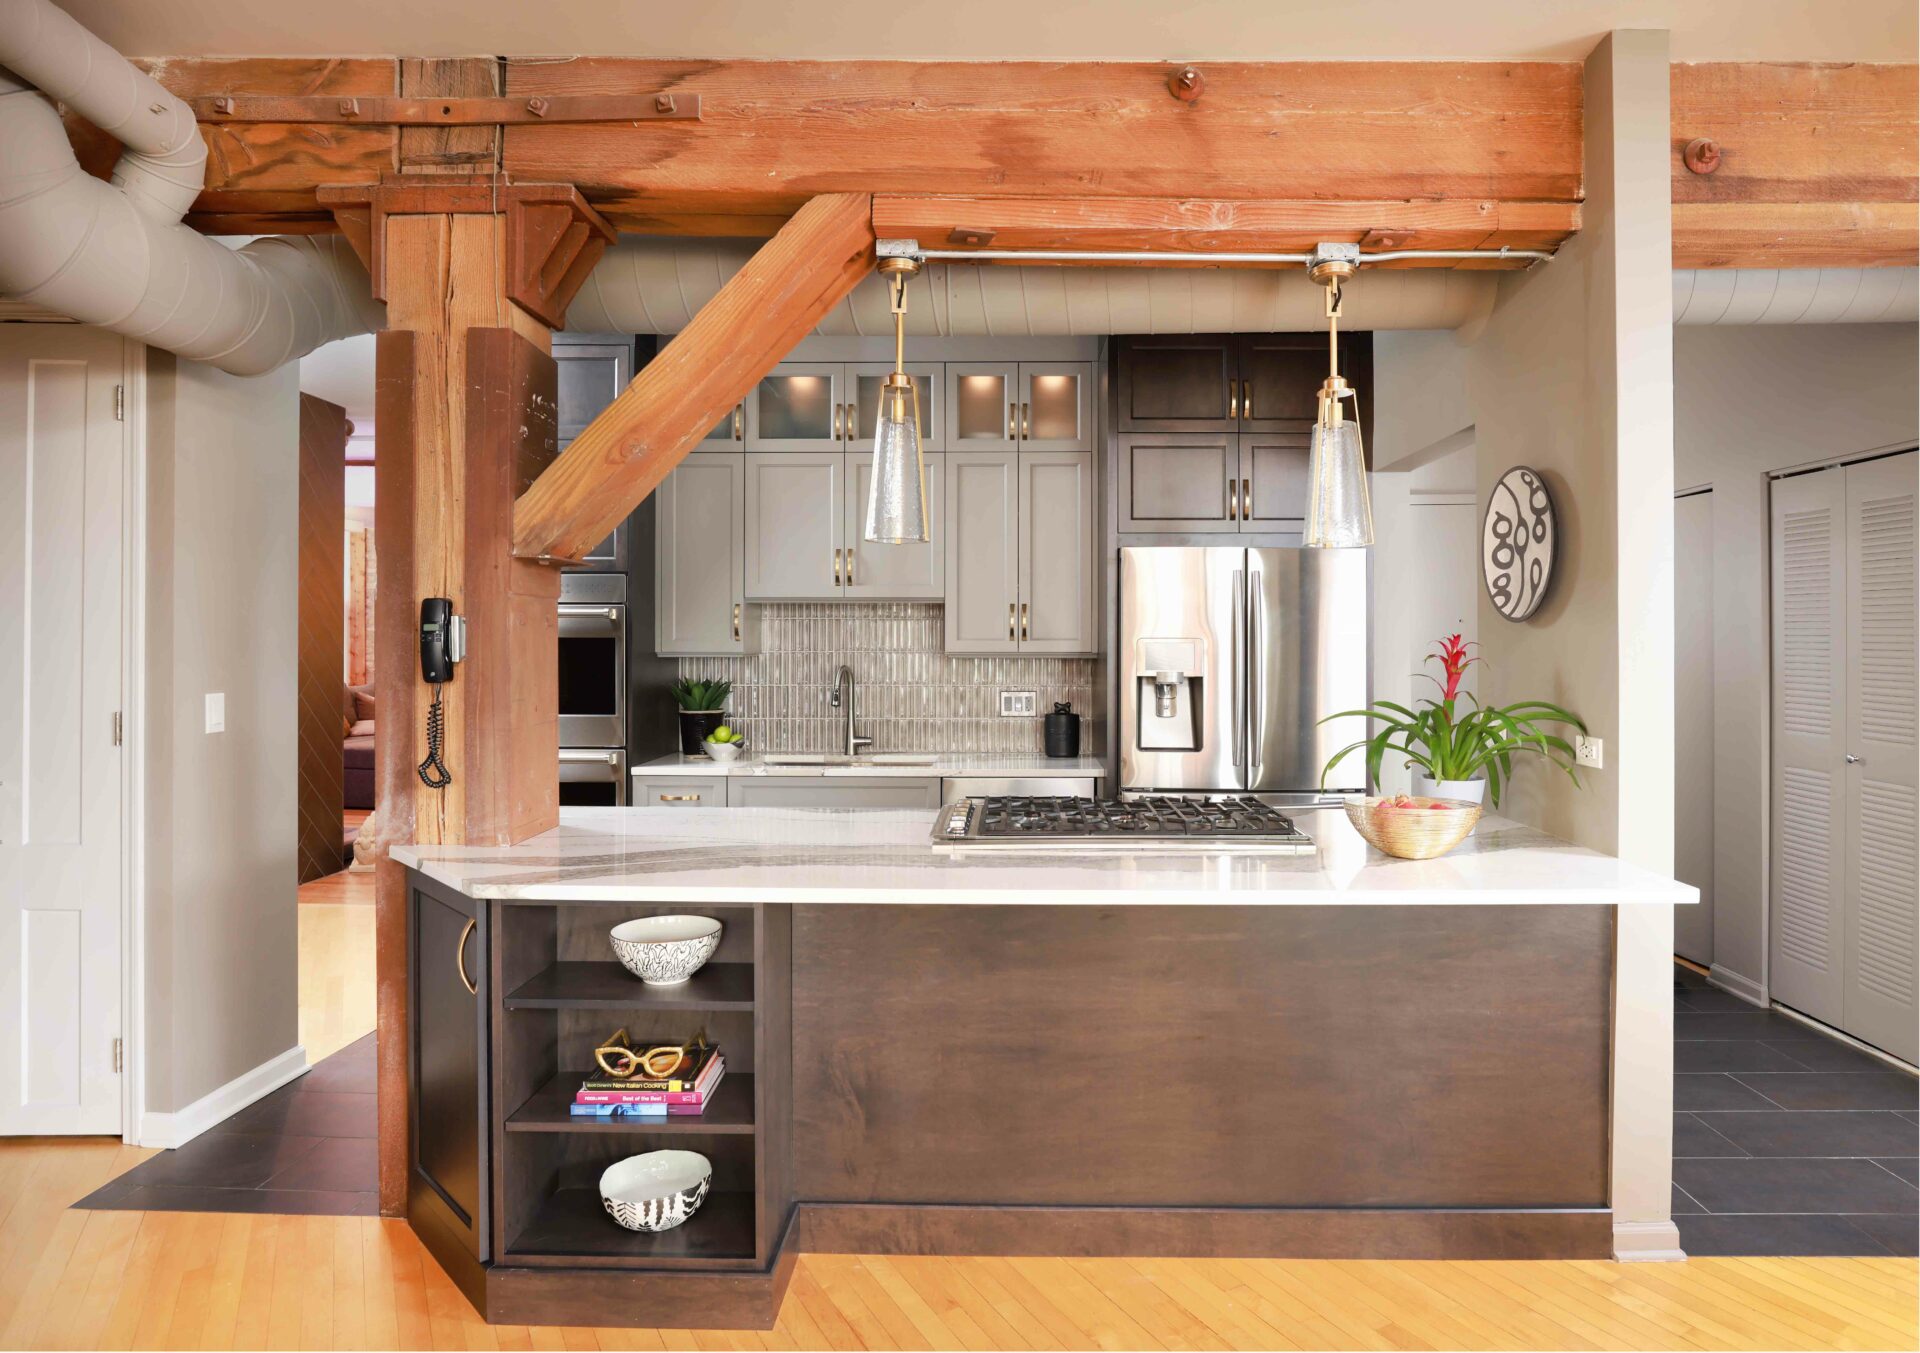 Chicago condo two-tone kitchen with exposed wooden beam incorporated into island